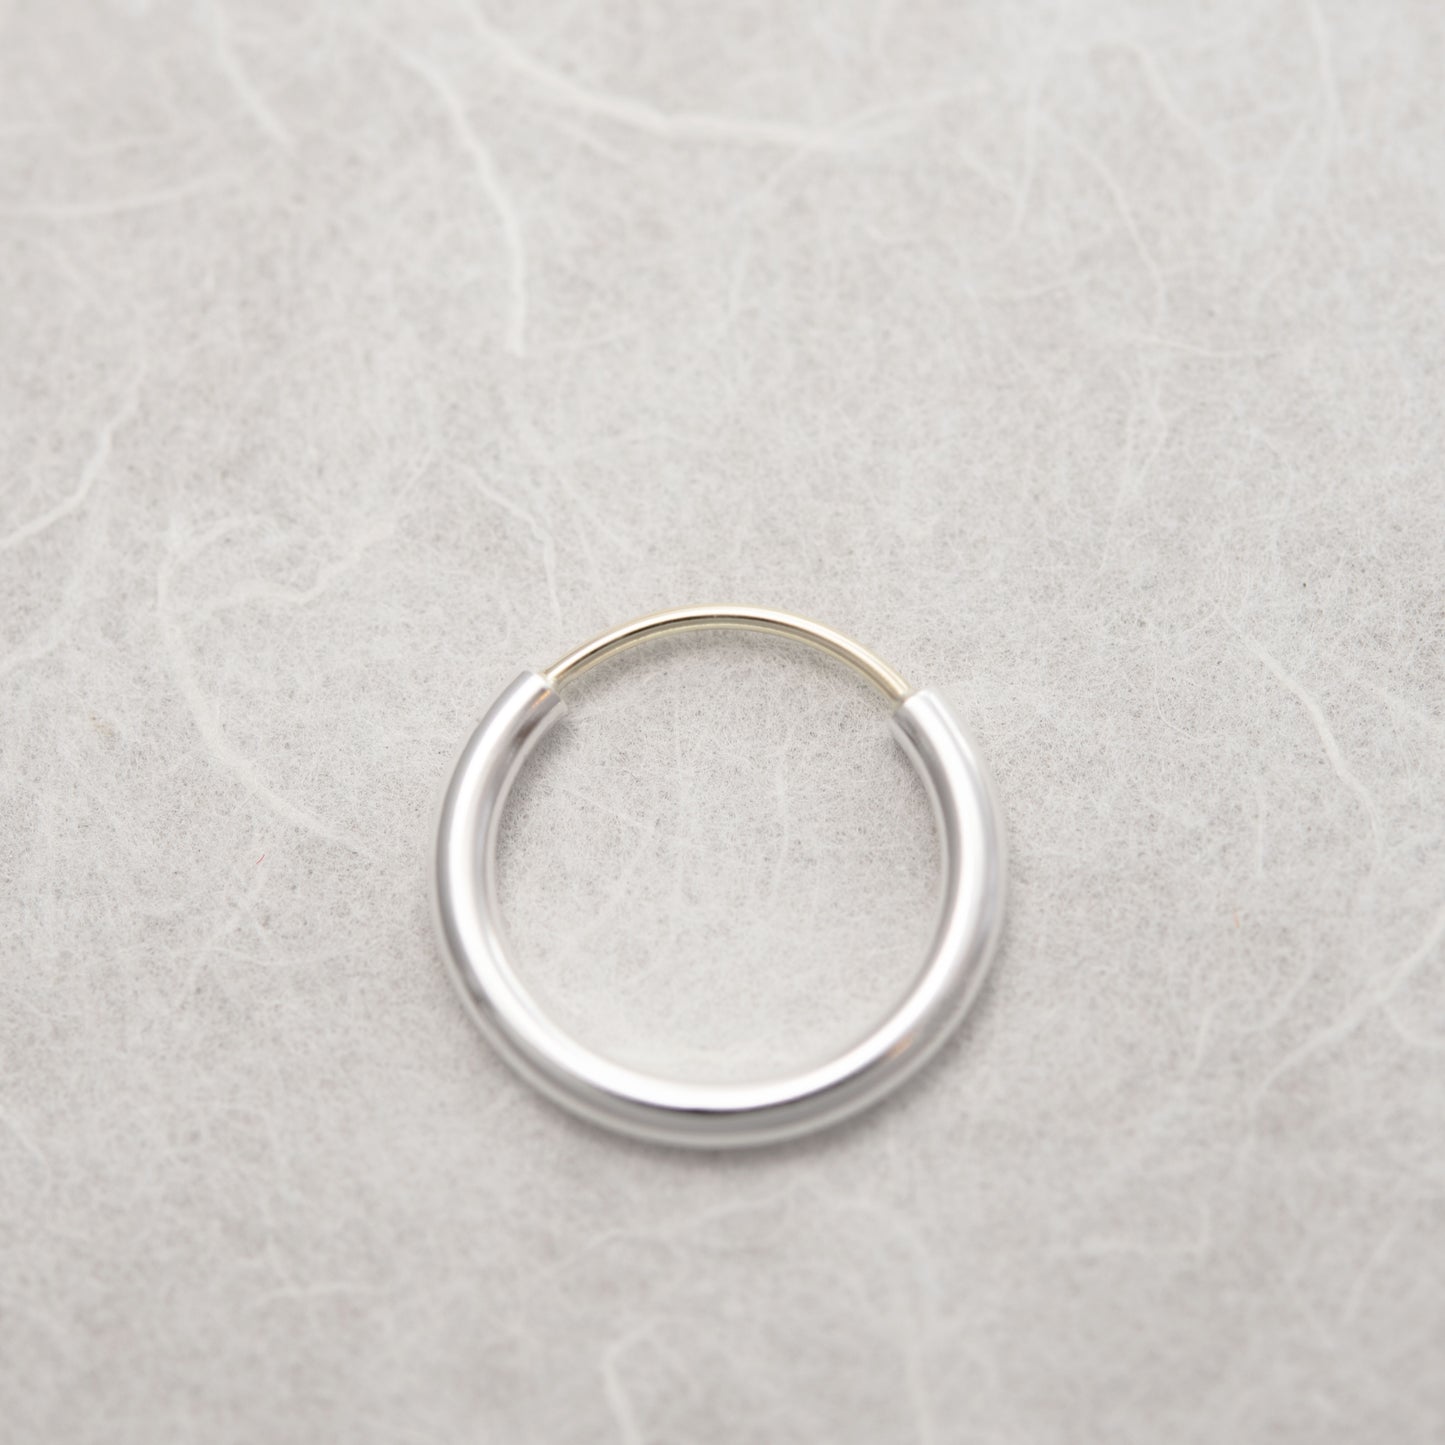 Perfect simple engagement ring for the minimalist bride-to-be by AgJc